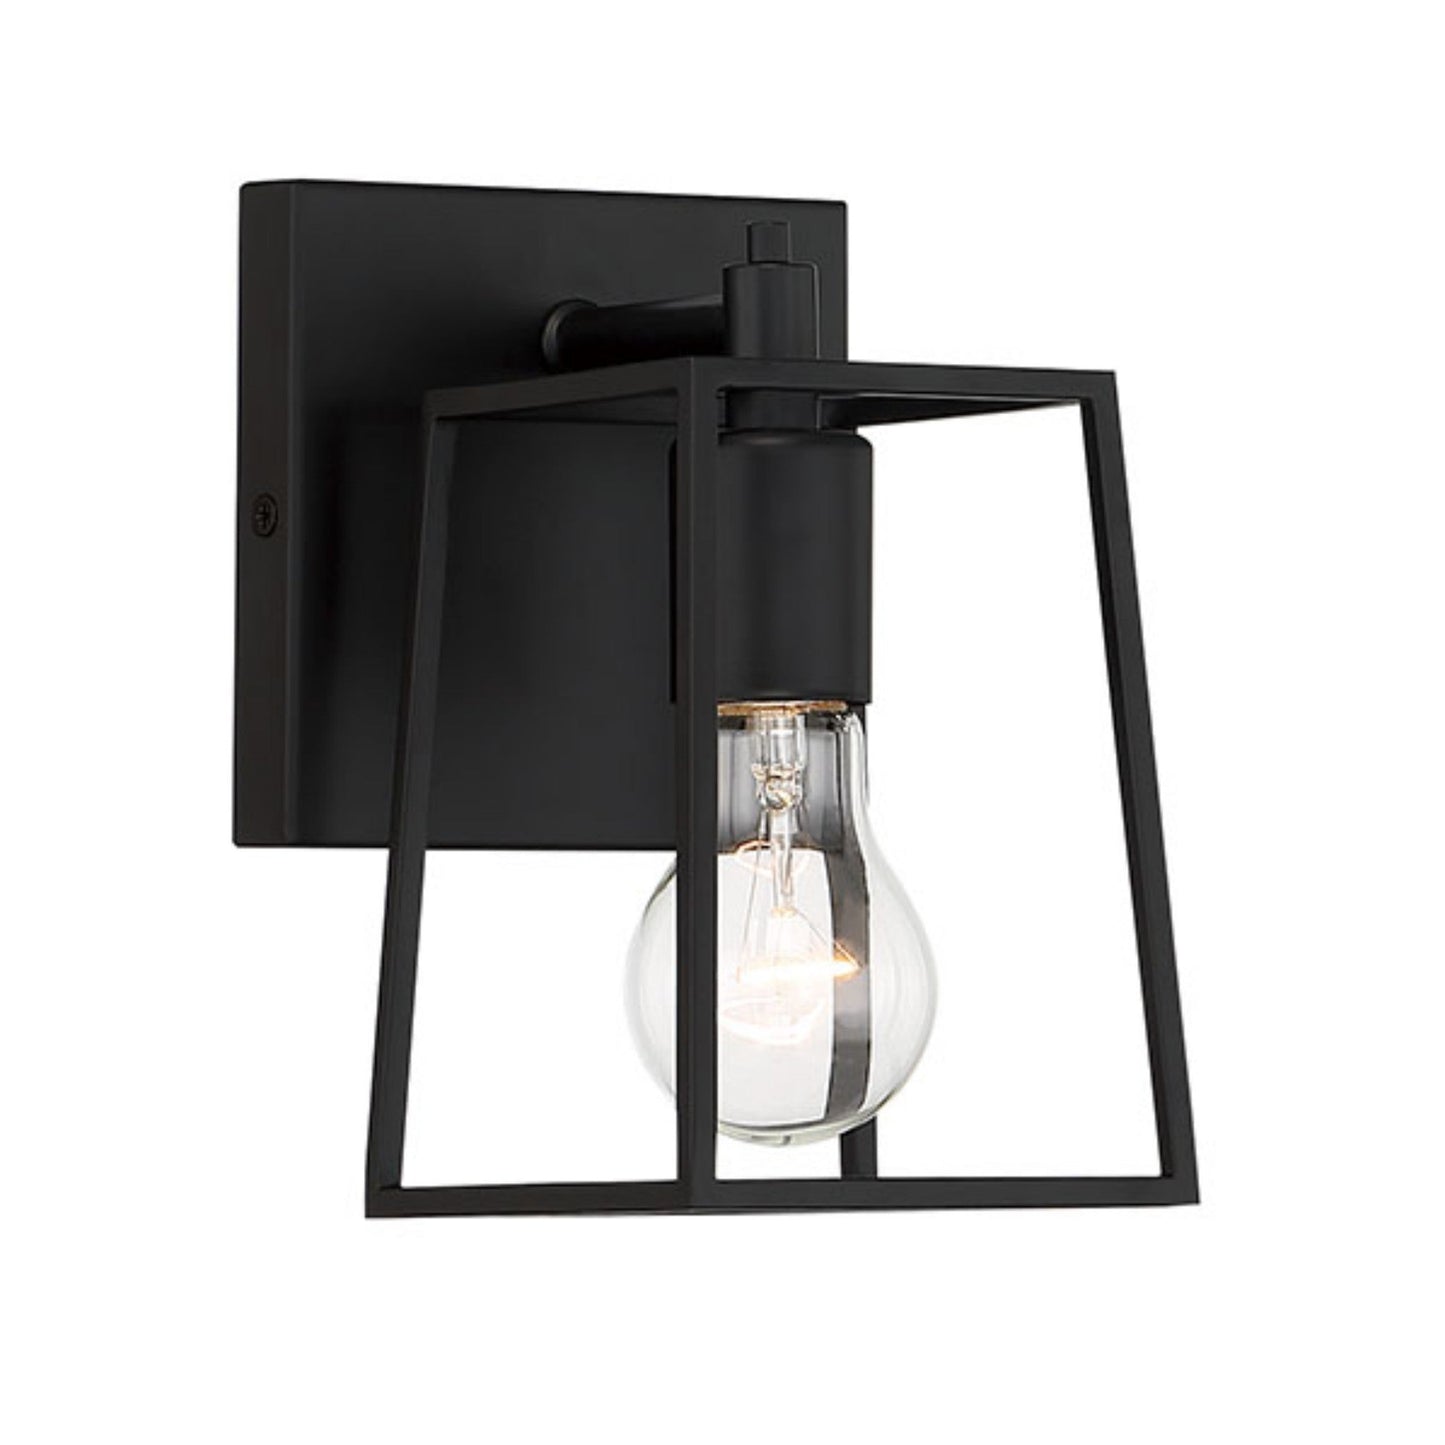 Craftmade Dunn 5" x 9" 1-Light Flat Black Wall Sconce With Steel Frame Shade